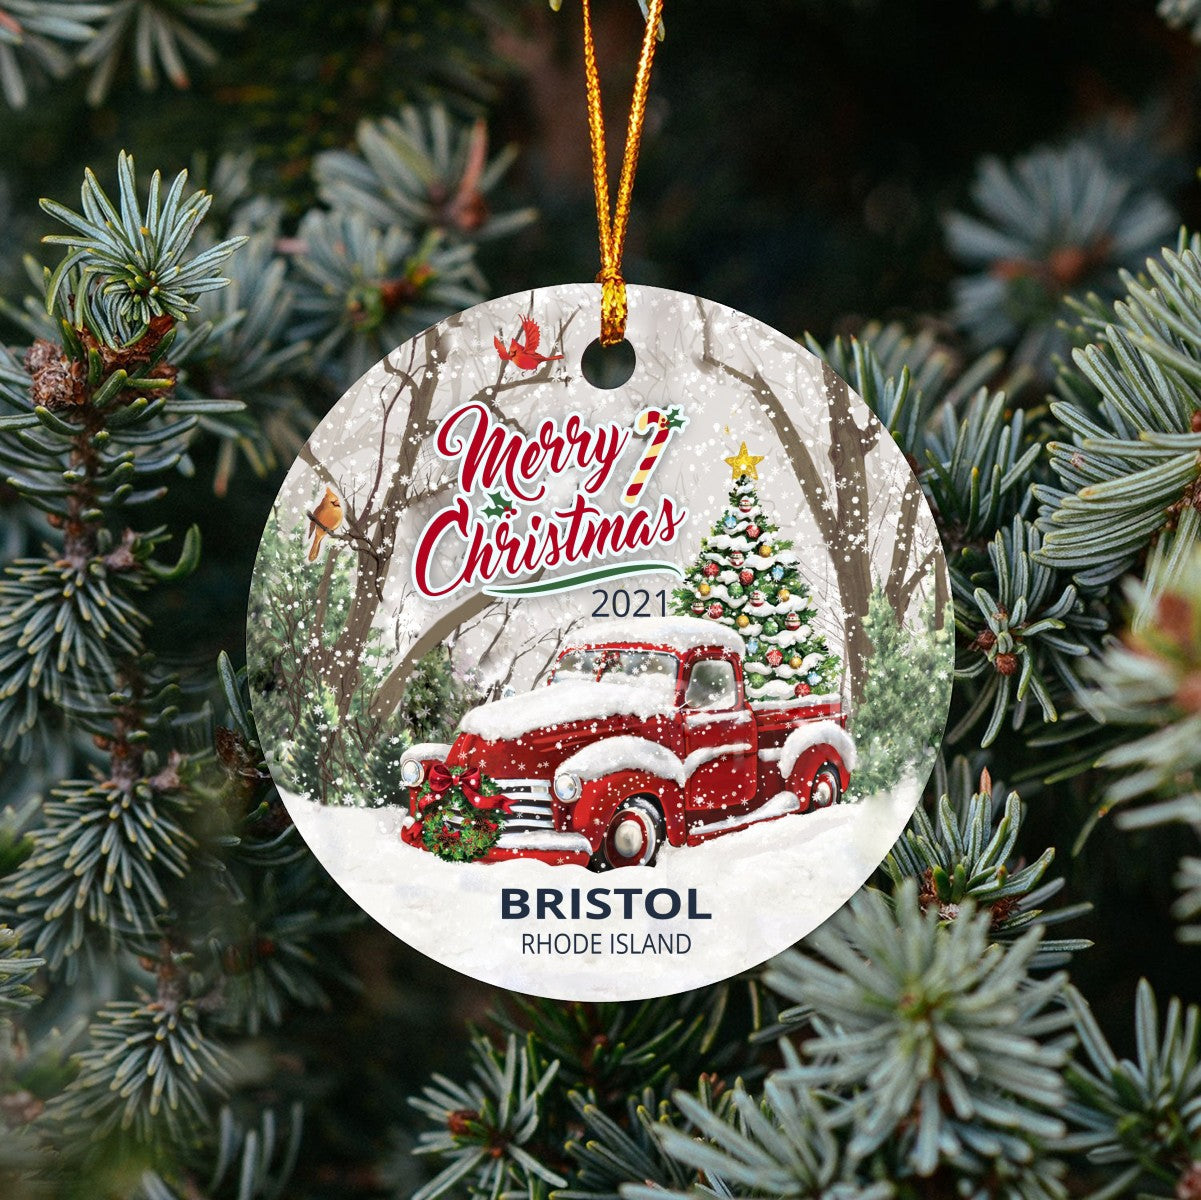 Christmas Tree Ornaments Bristol - Ornament With Name City, State Bristol Rhode Island RI Ornament - Red Truck Xmas Ornaments 3'' Plastic Gift For Family, Friend And Housewarming